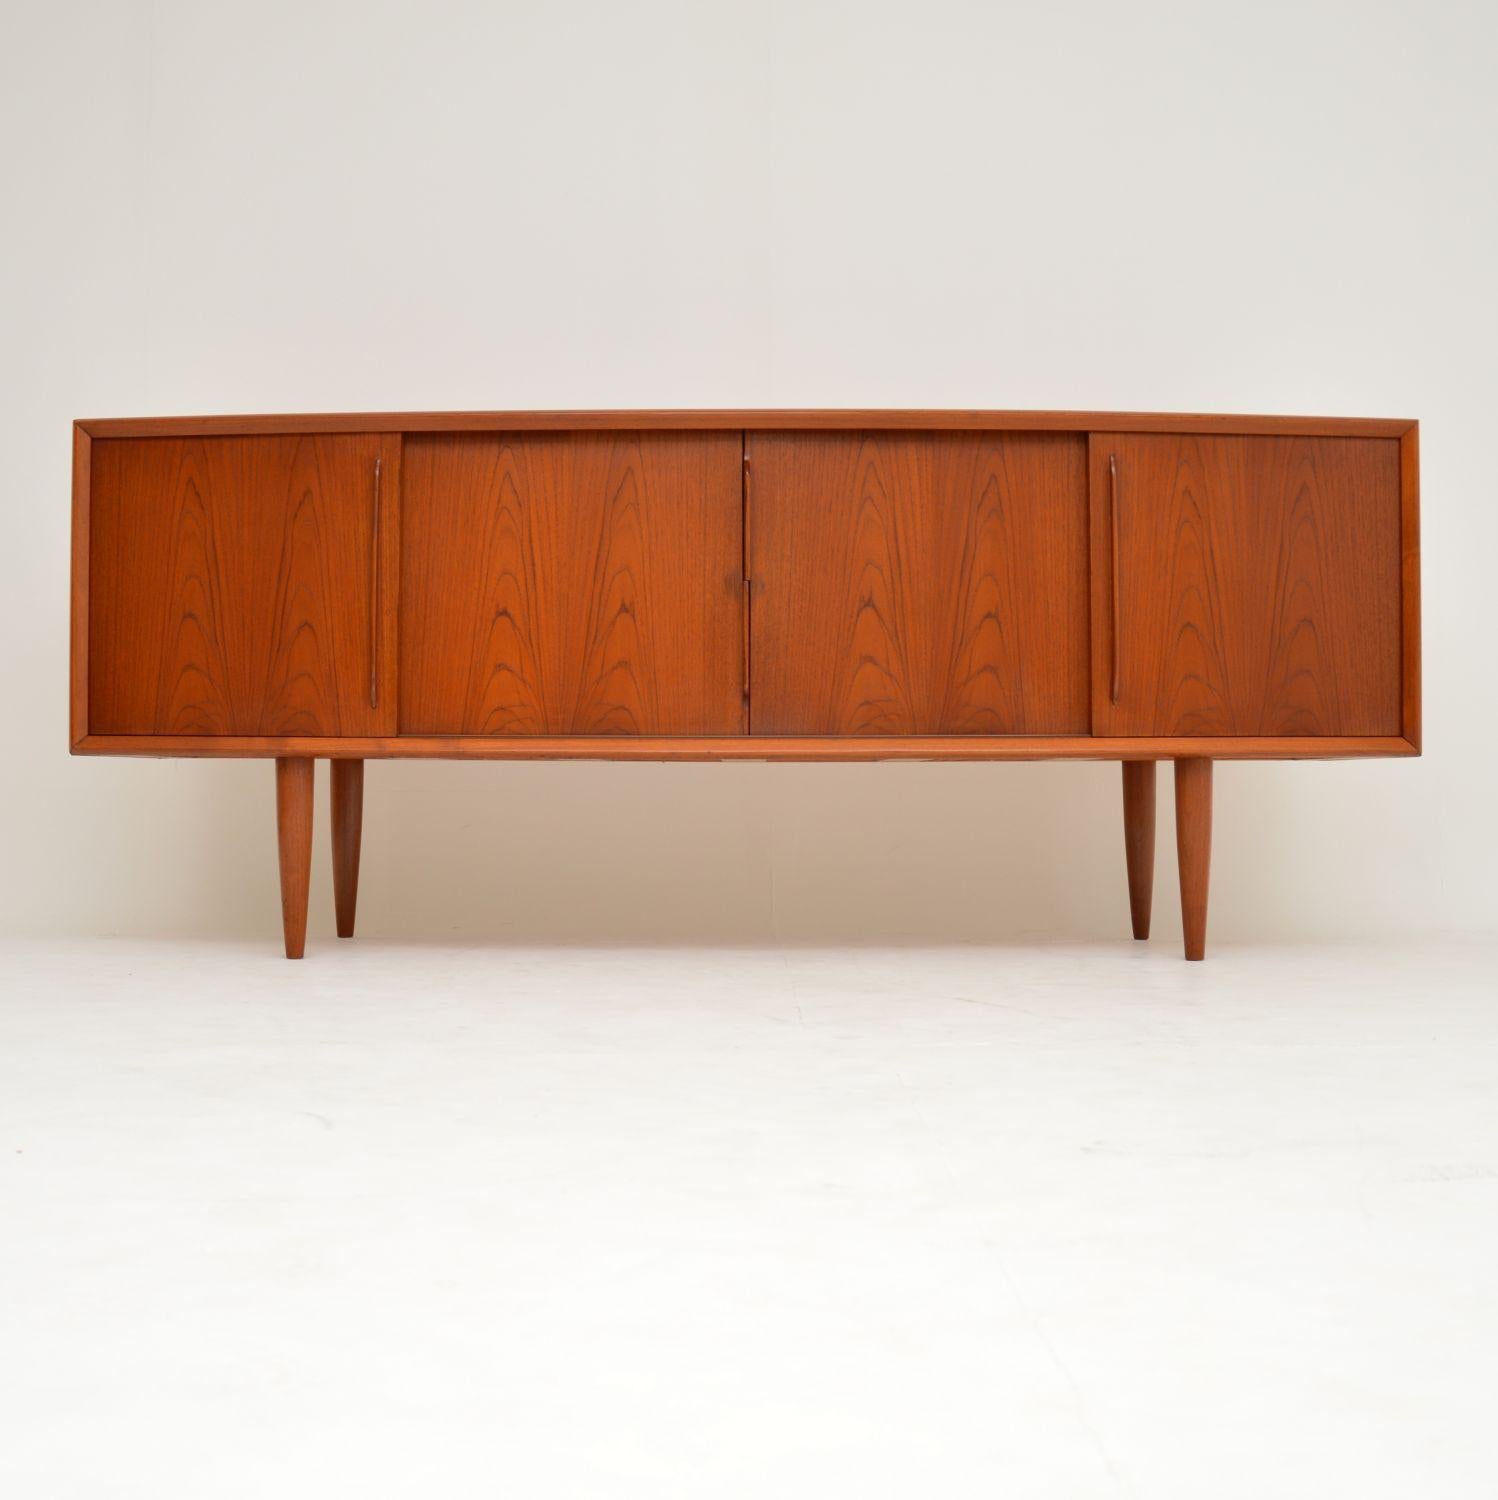 A superb Danish vintage sideboard in teak, this dates from the 1960s. It was designed by Svend Aage Madsen, and was produced by H.P Hansen. The quality is fantastic, this has a beautiful sleek design, and unusual slightly bow fronted design. We have